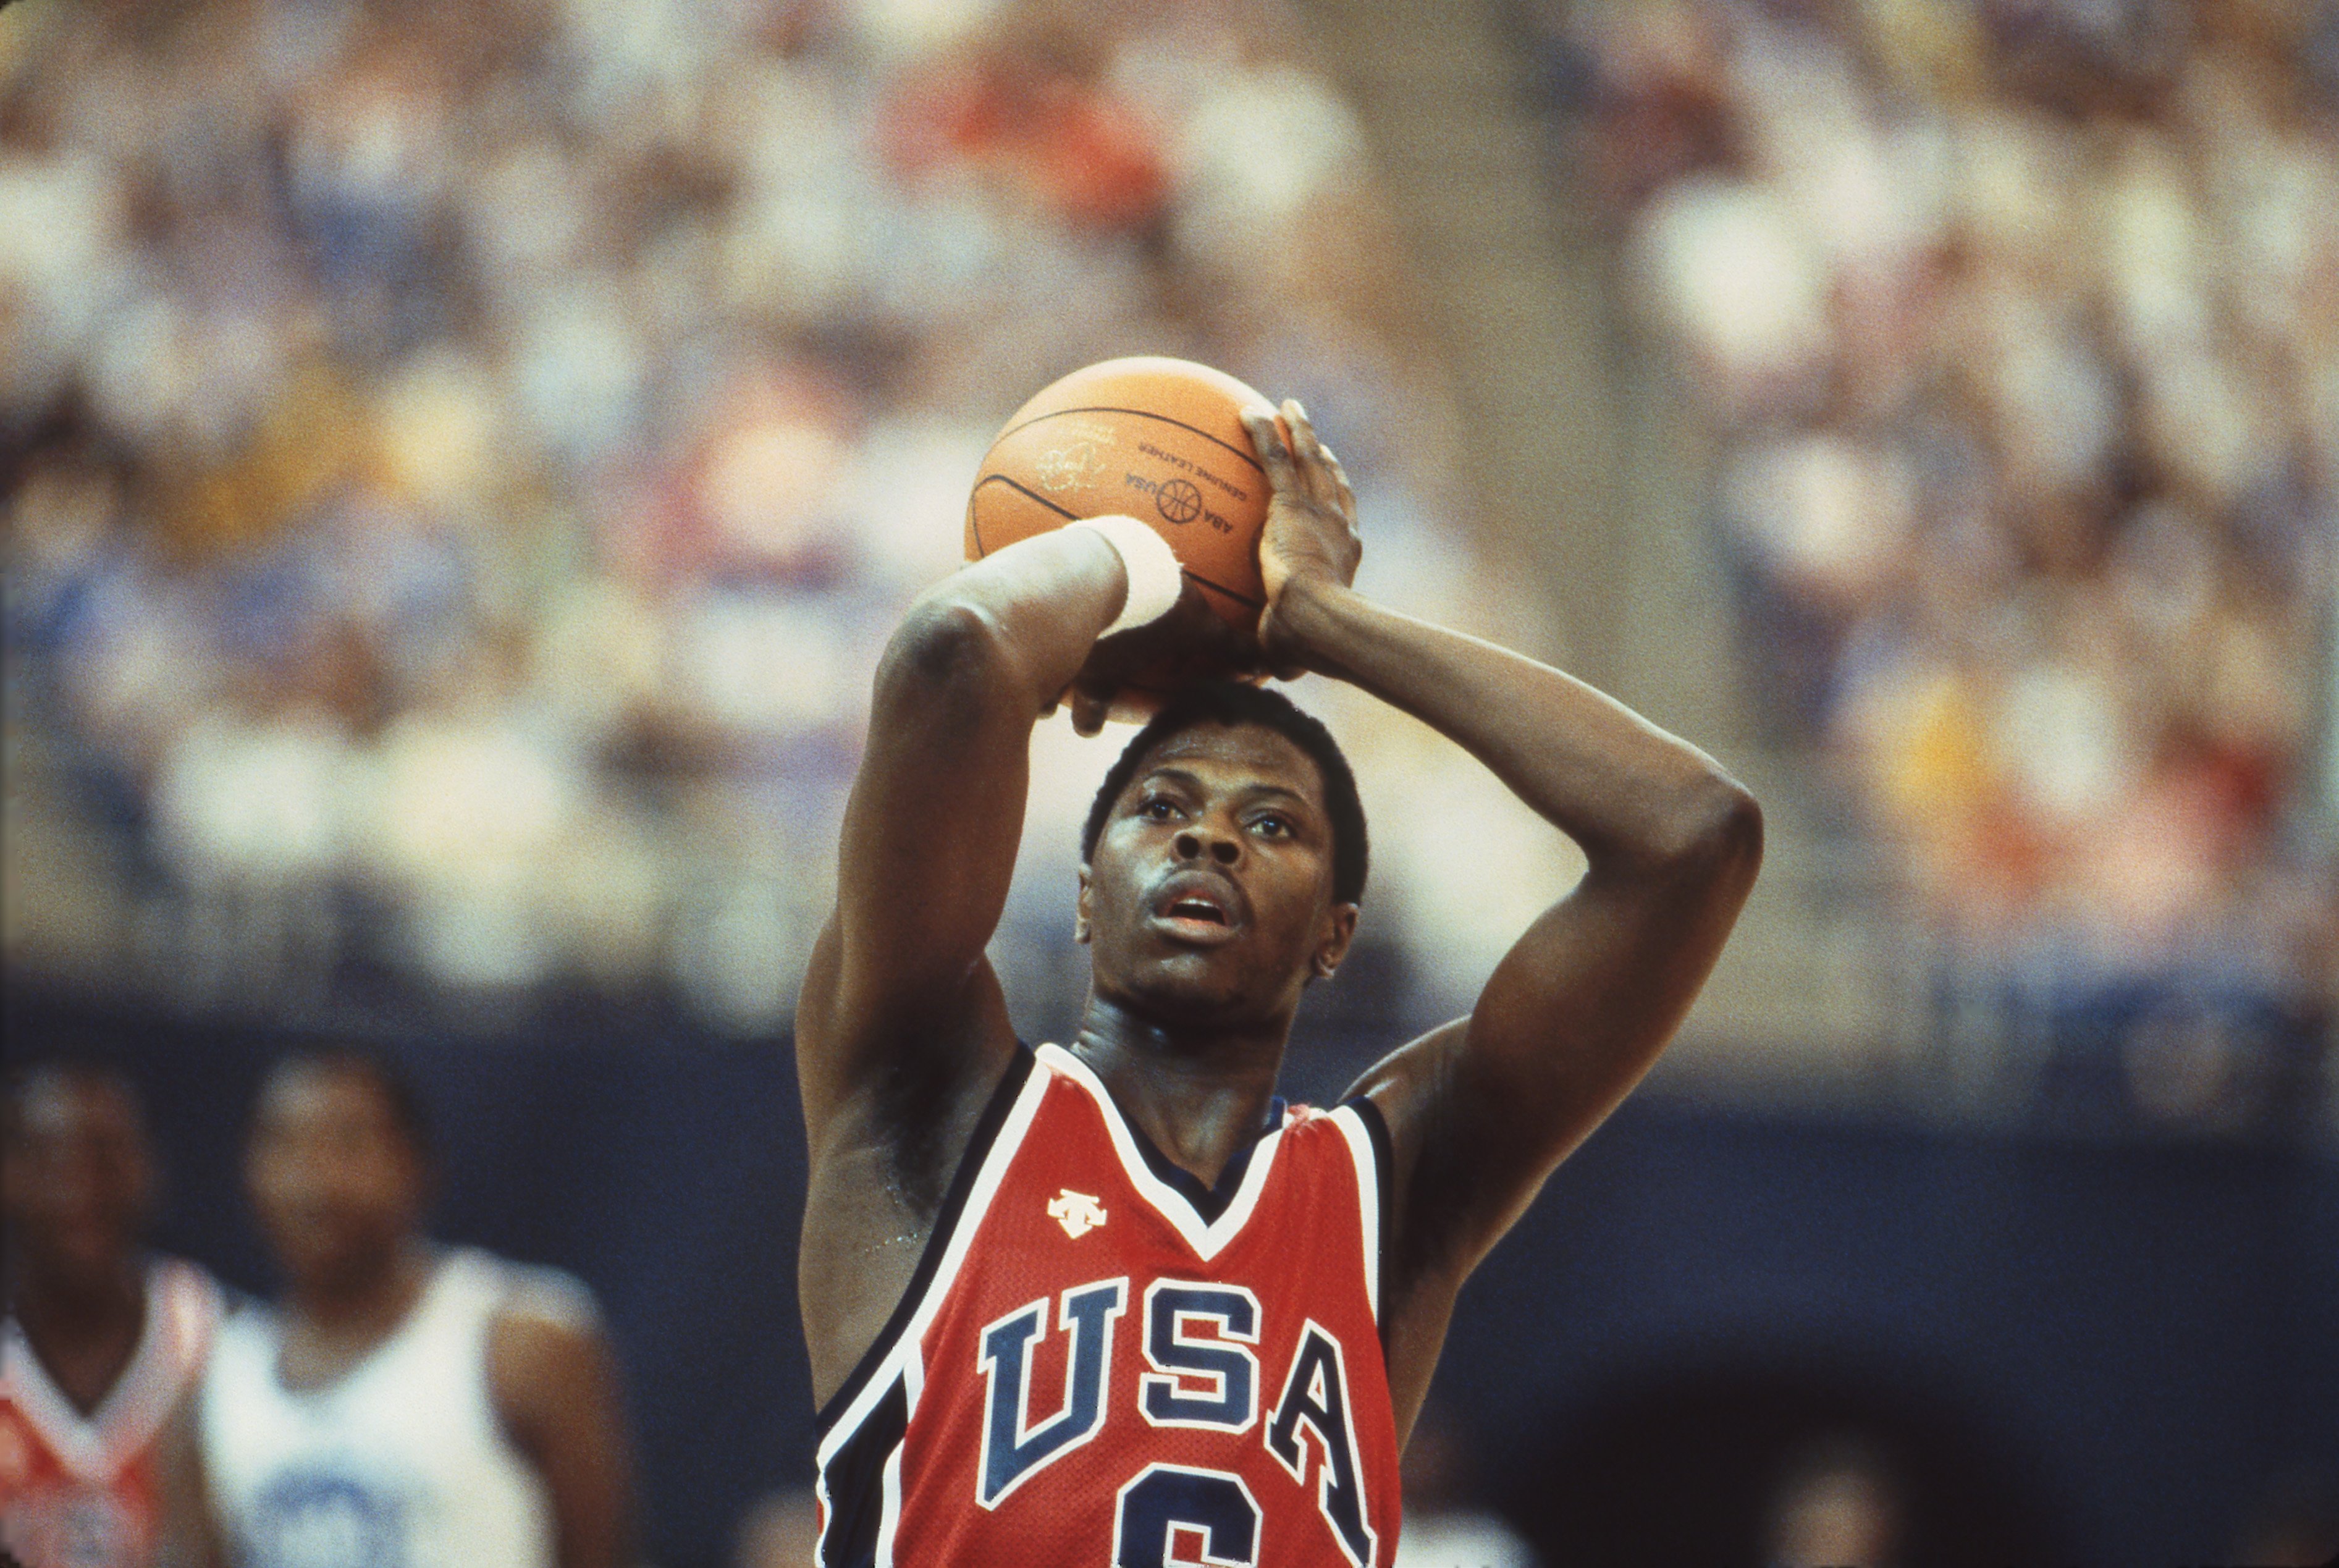 Patrick Ewing, Men's Basketball team playing at 1984 Olympics at the Los Angeles Memorial Coliseum | Photo: GettyImages